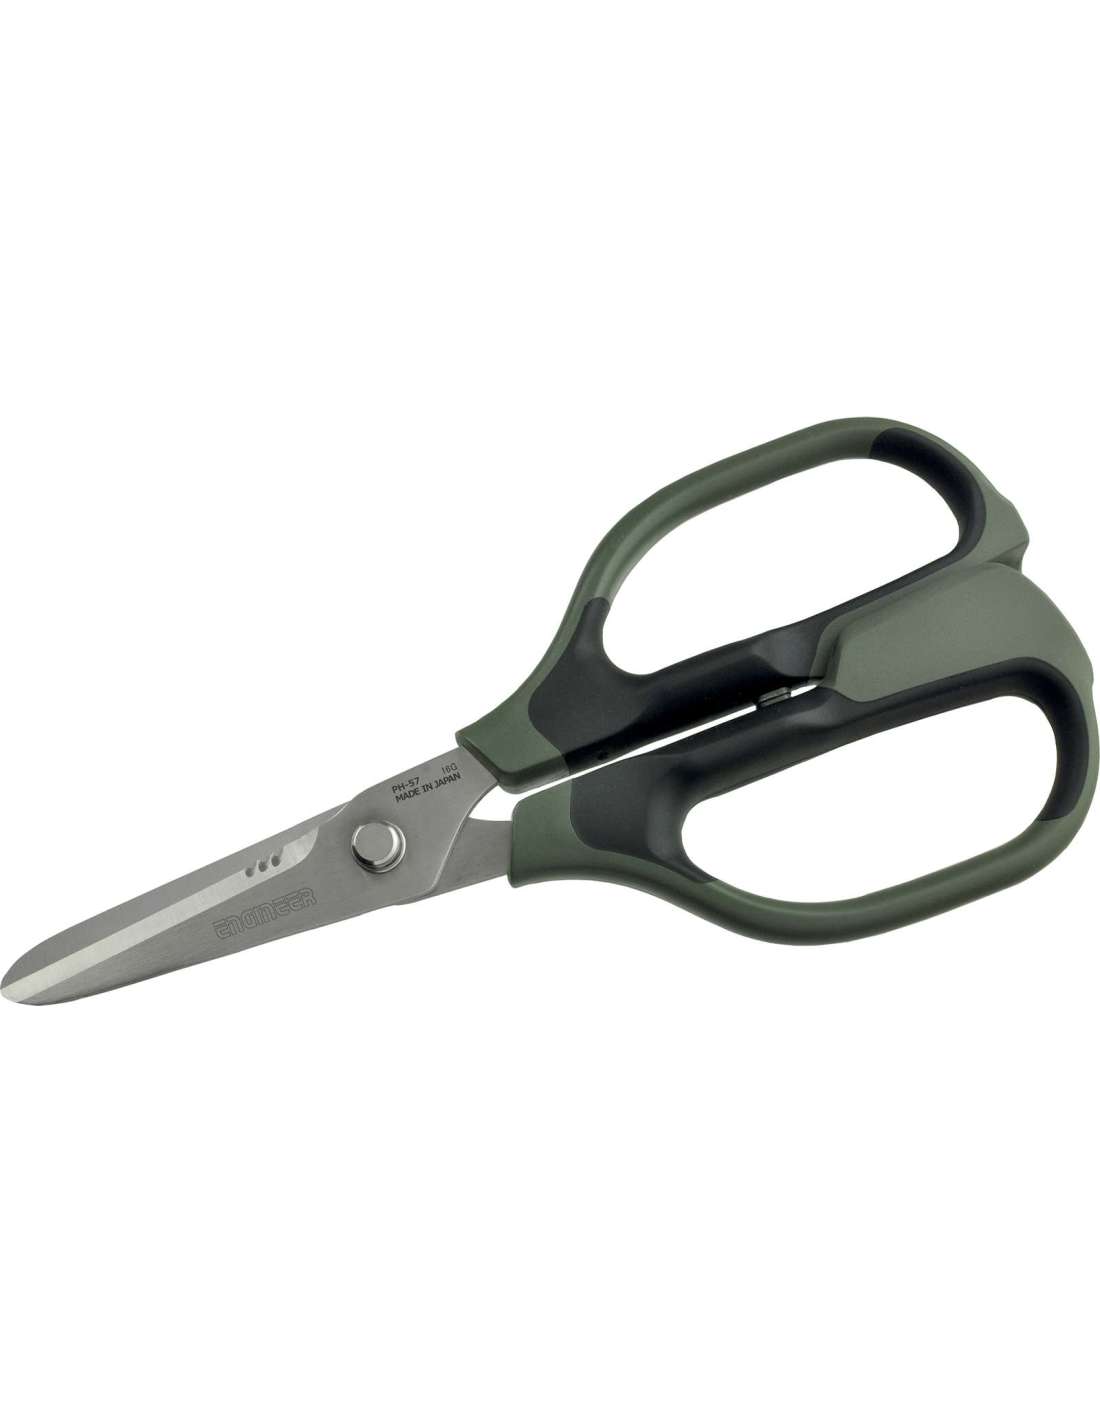 https://www.clipcarbono.com/11158-thickbox_default/heavy-duty-scissors-for-cutting-kevlar-and-carbon.jpg